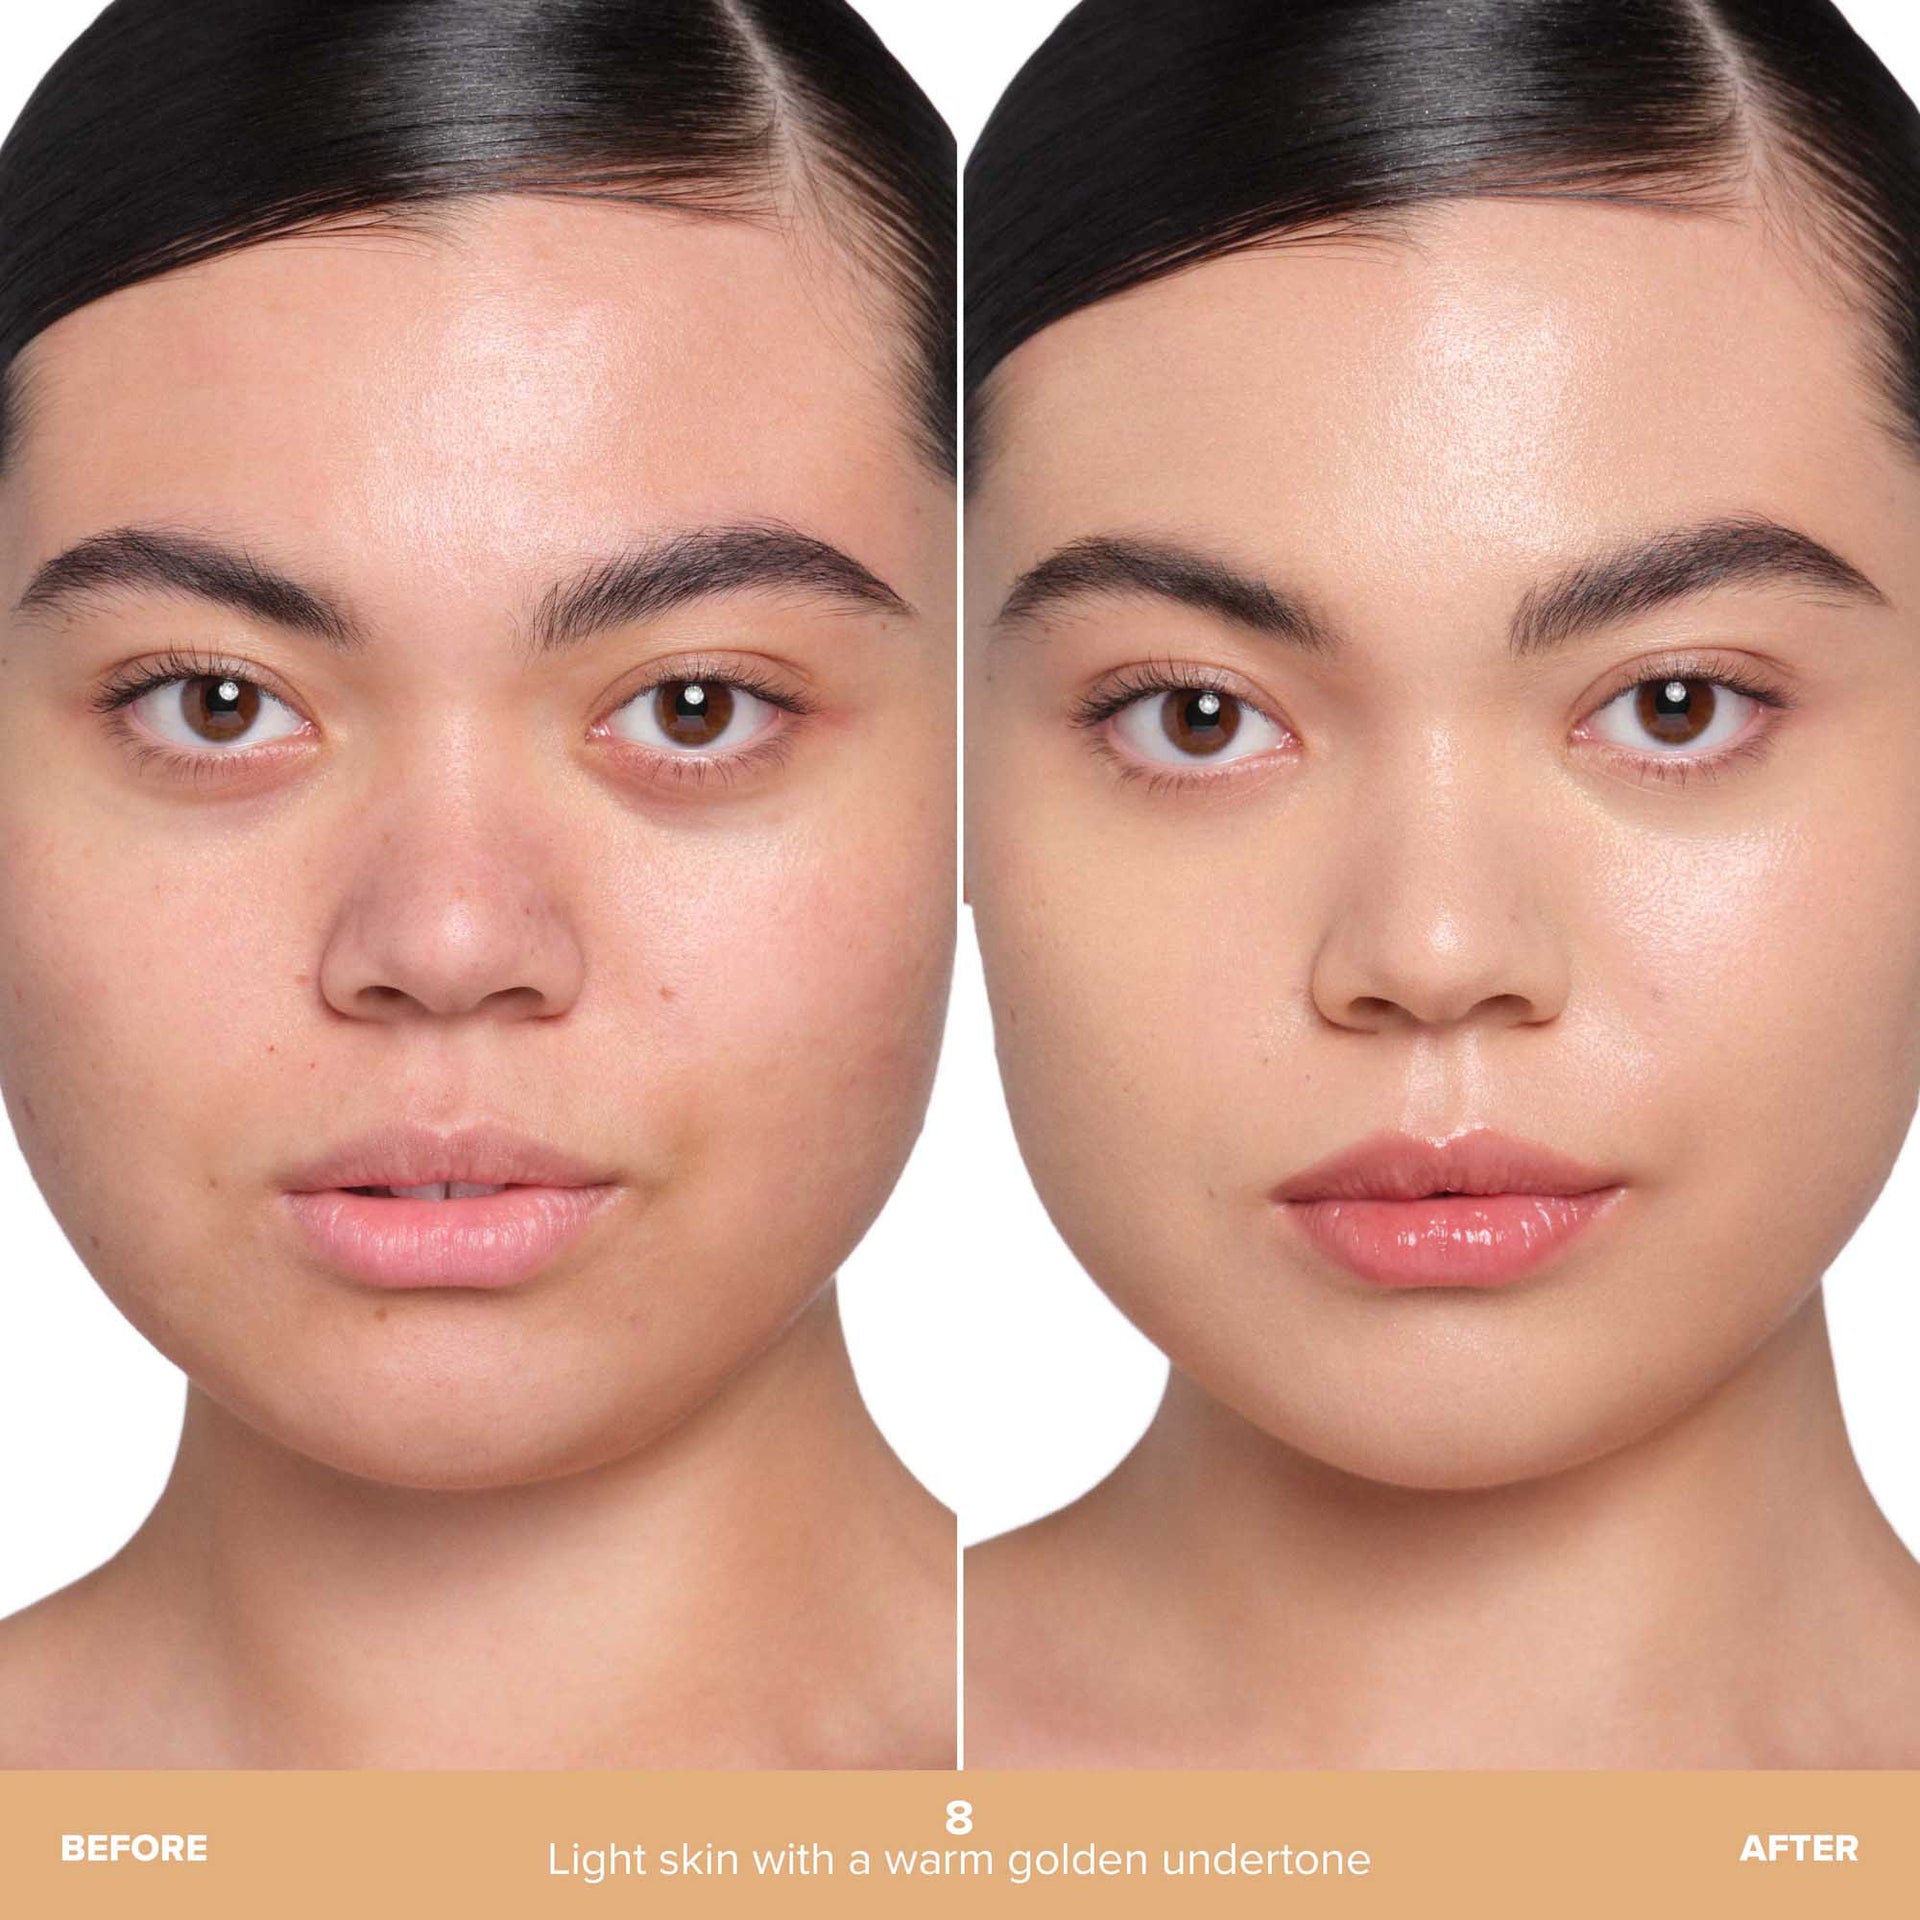 Shade 8 | Beauty Balm Serum Boosted Skin Tint Before & After - Shade 8